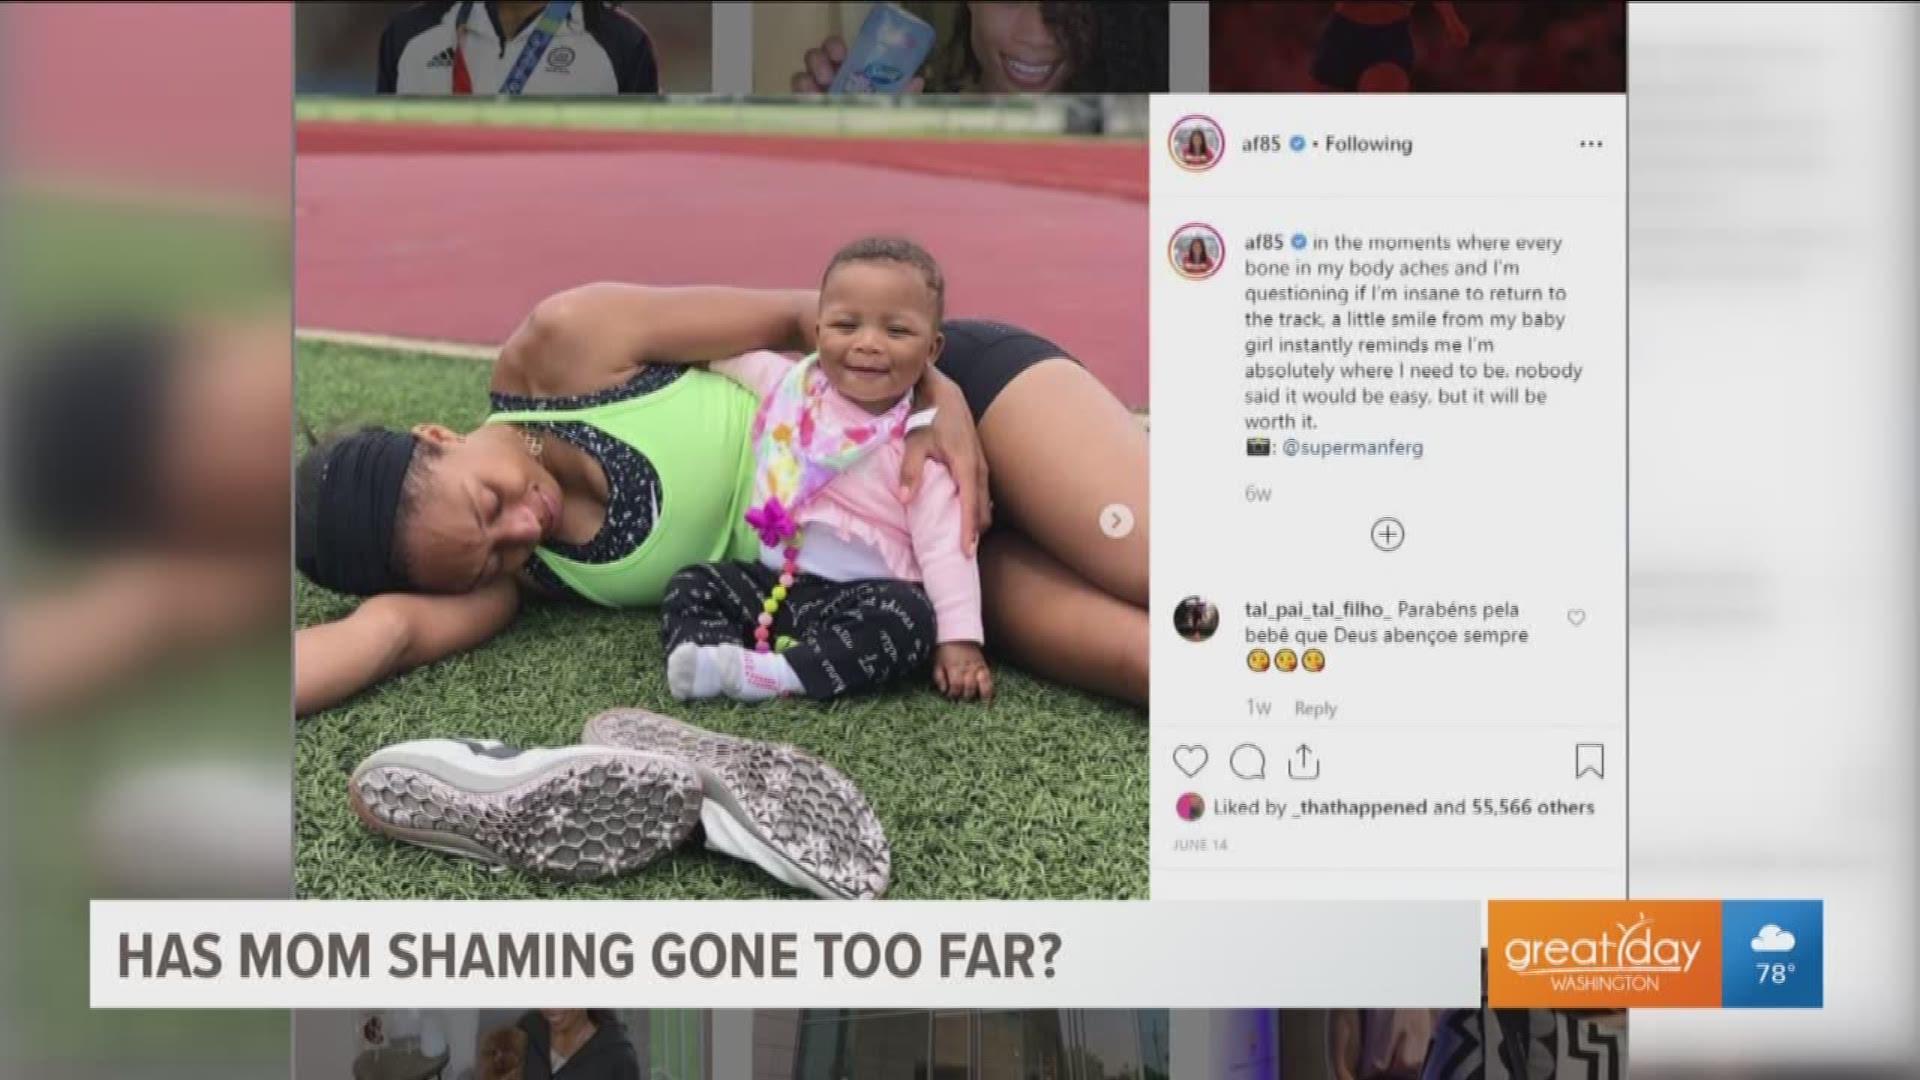 Recently, moms in the spotlight like Alyson Felix, Tamron Hall and Jessica Simpson have all become victims of "mom-shaming". Aside from celebrity mothers, everyday moms face the same backlash in the age of social media. Michelle Schoenfeld, well-being expert provides tips on how to deal with the backlash.